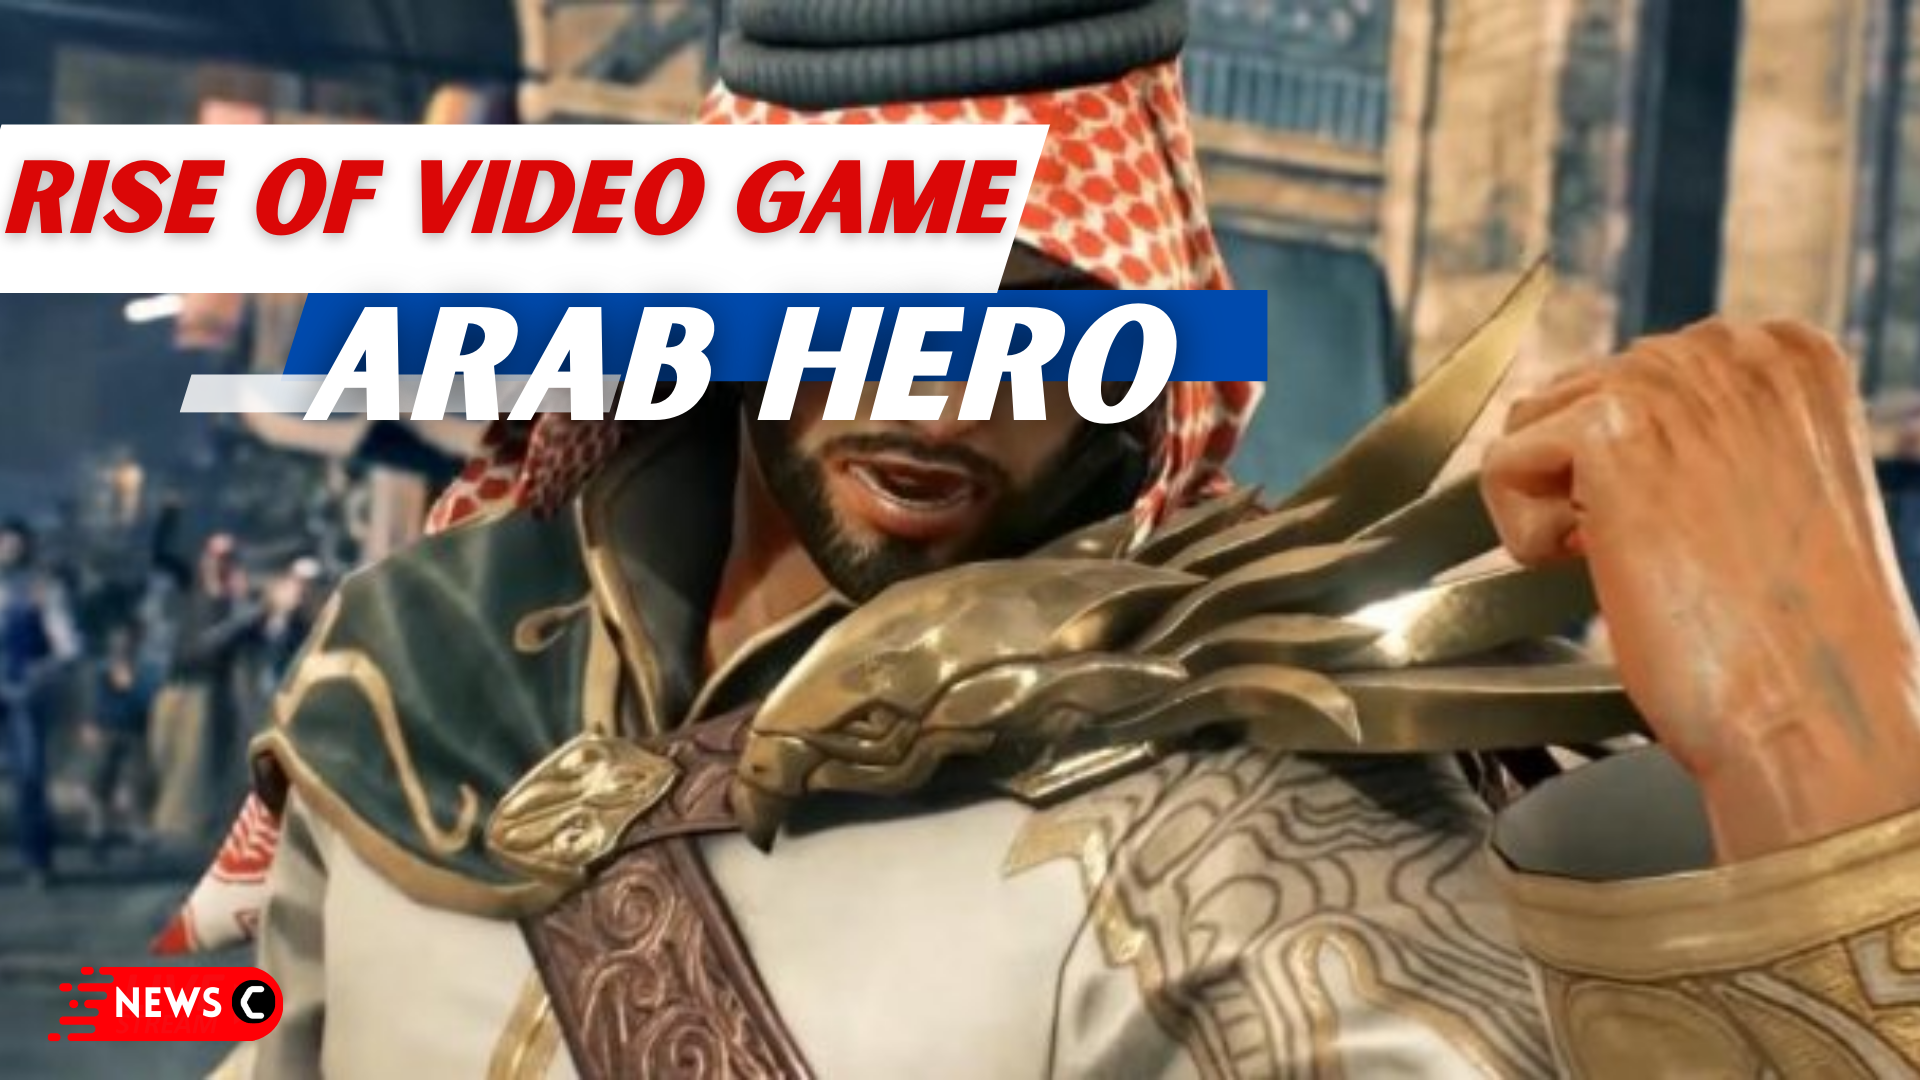 Video Games Are Now Portraying Arab Characters Positively